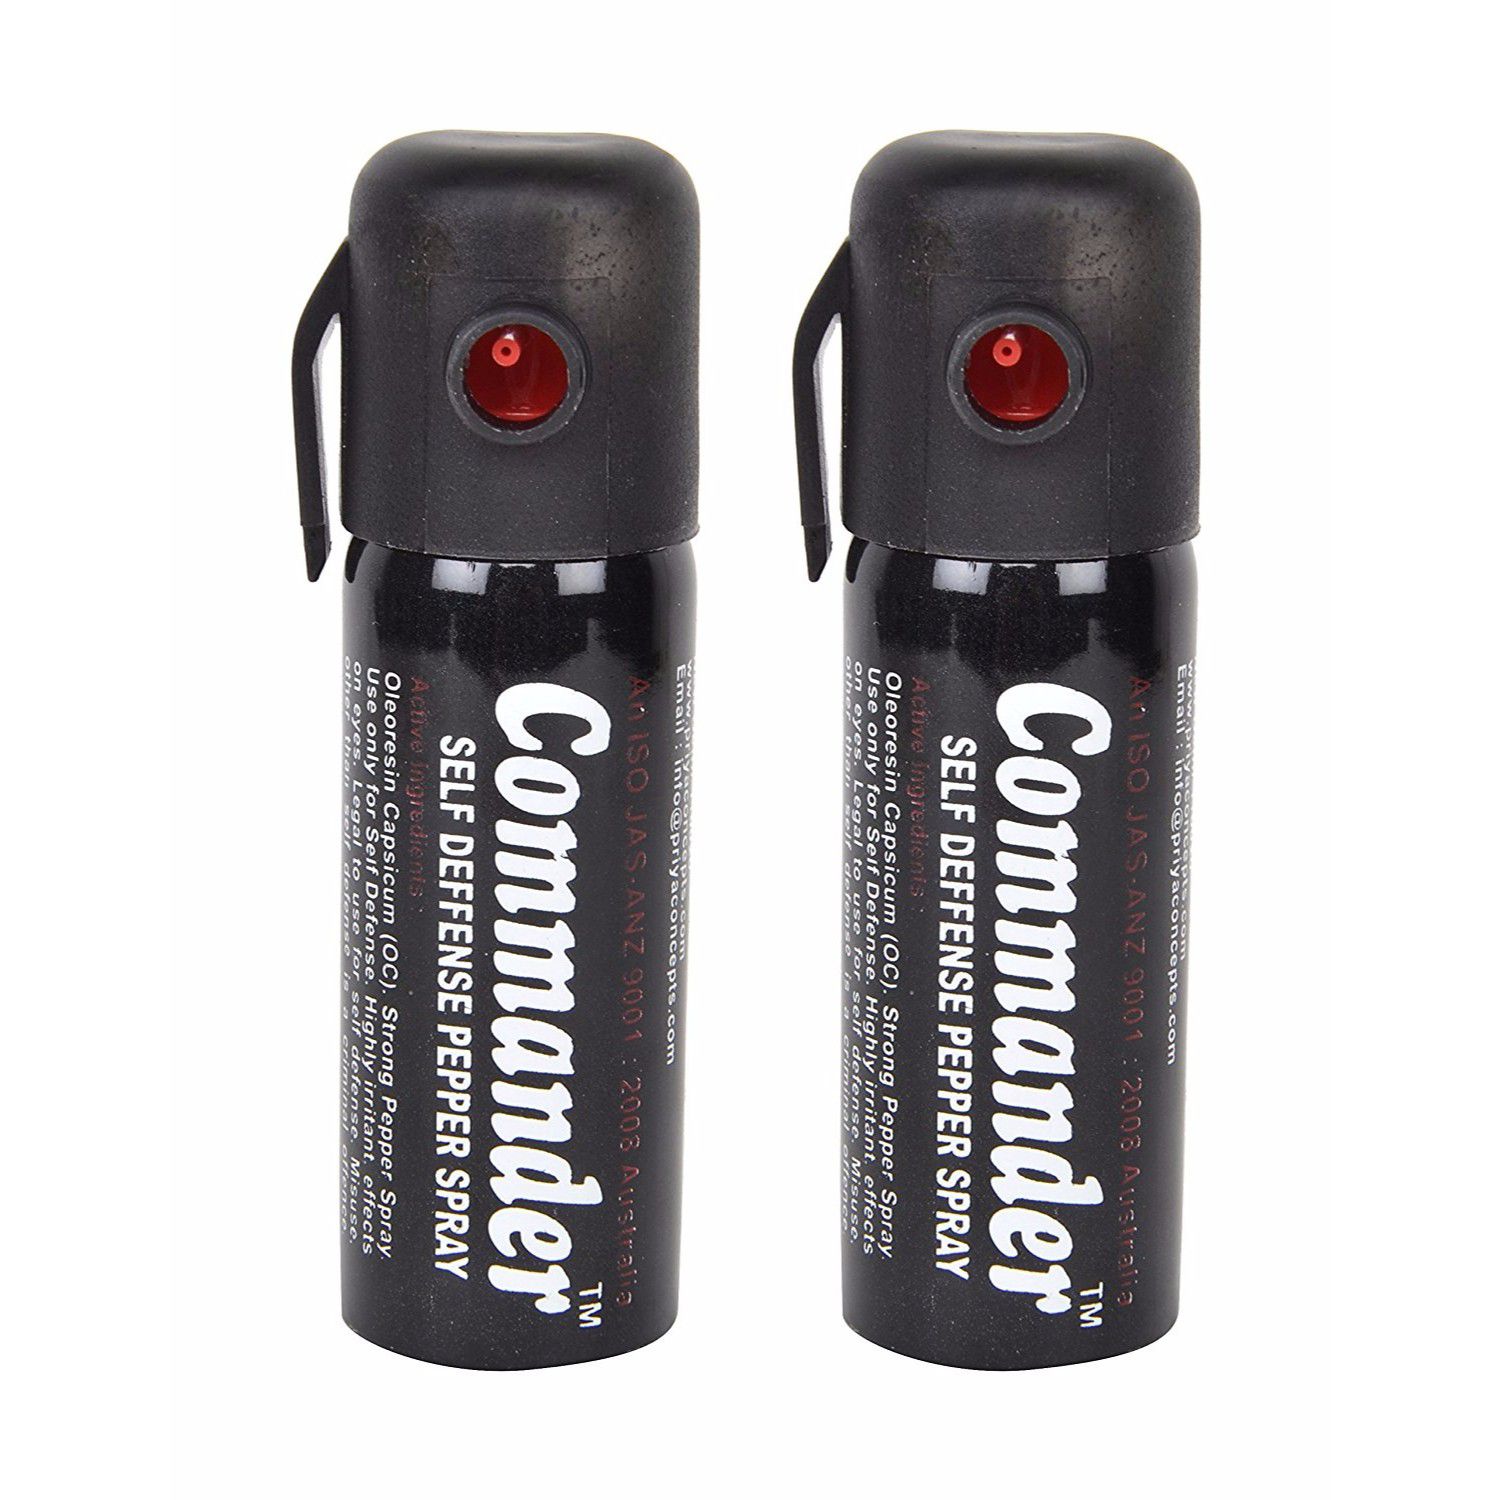 Commander Self Defence Women Safety Up To 10 Feet Range Pepper Spray (Pack Of 2)